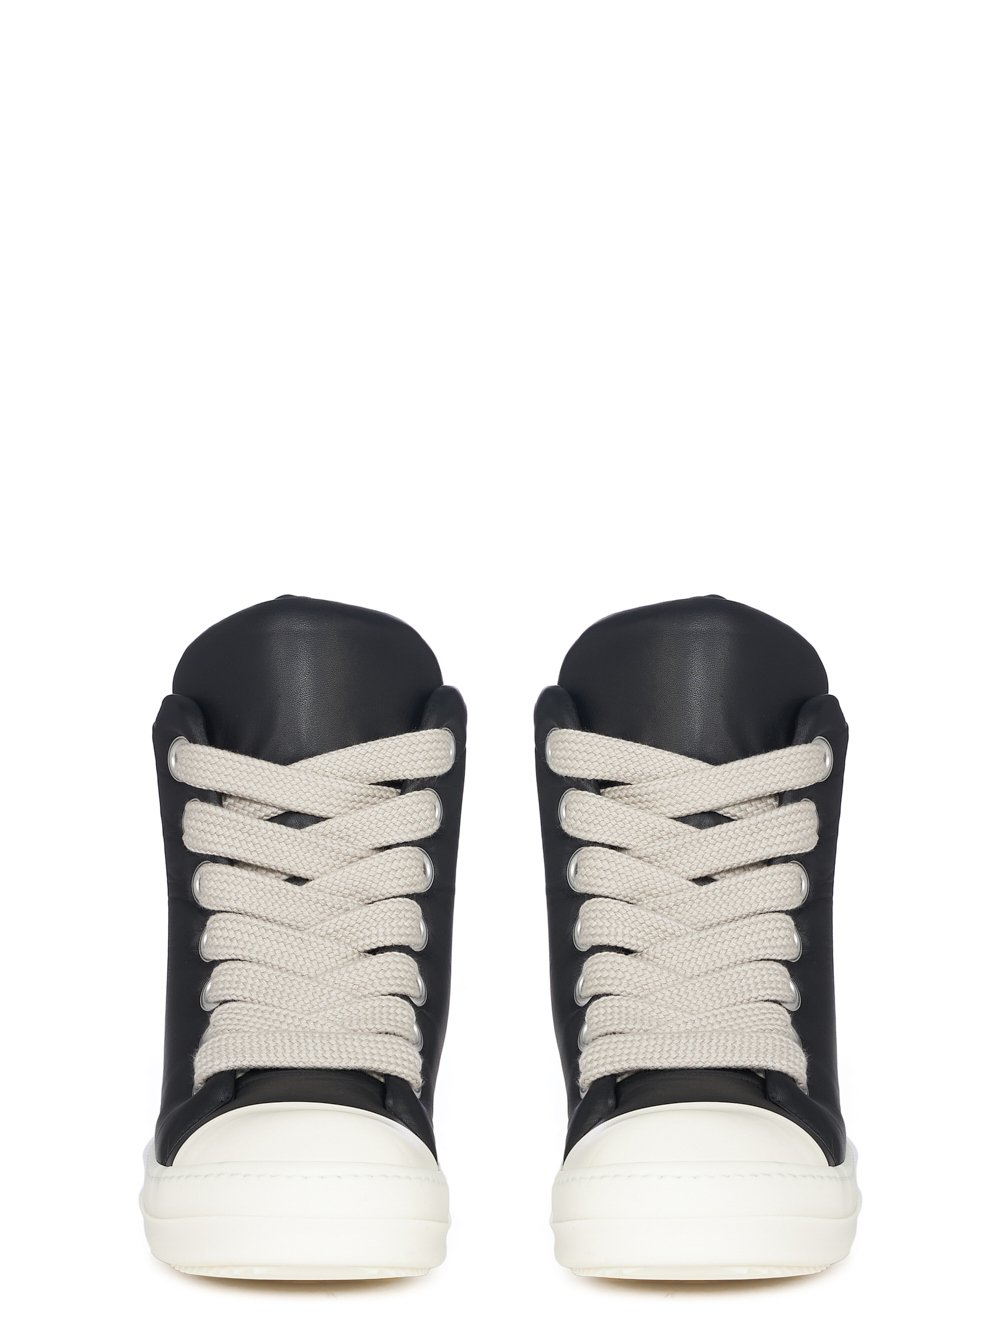 RICK OWENS FW23 LUXOR JUMBO LACE PADDED SNEAKERS IN BLACK AND MILK PEACHED LAMBSKIN